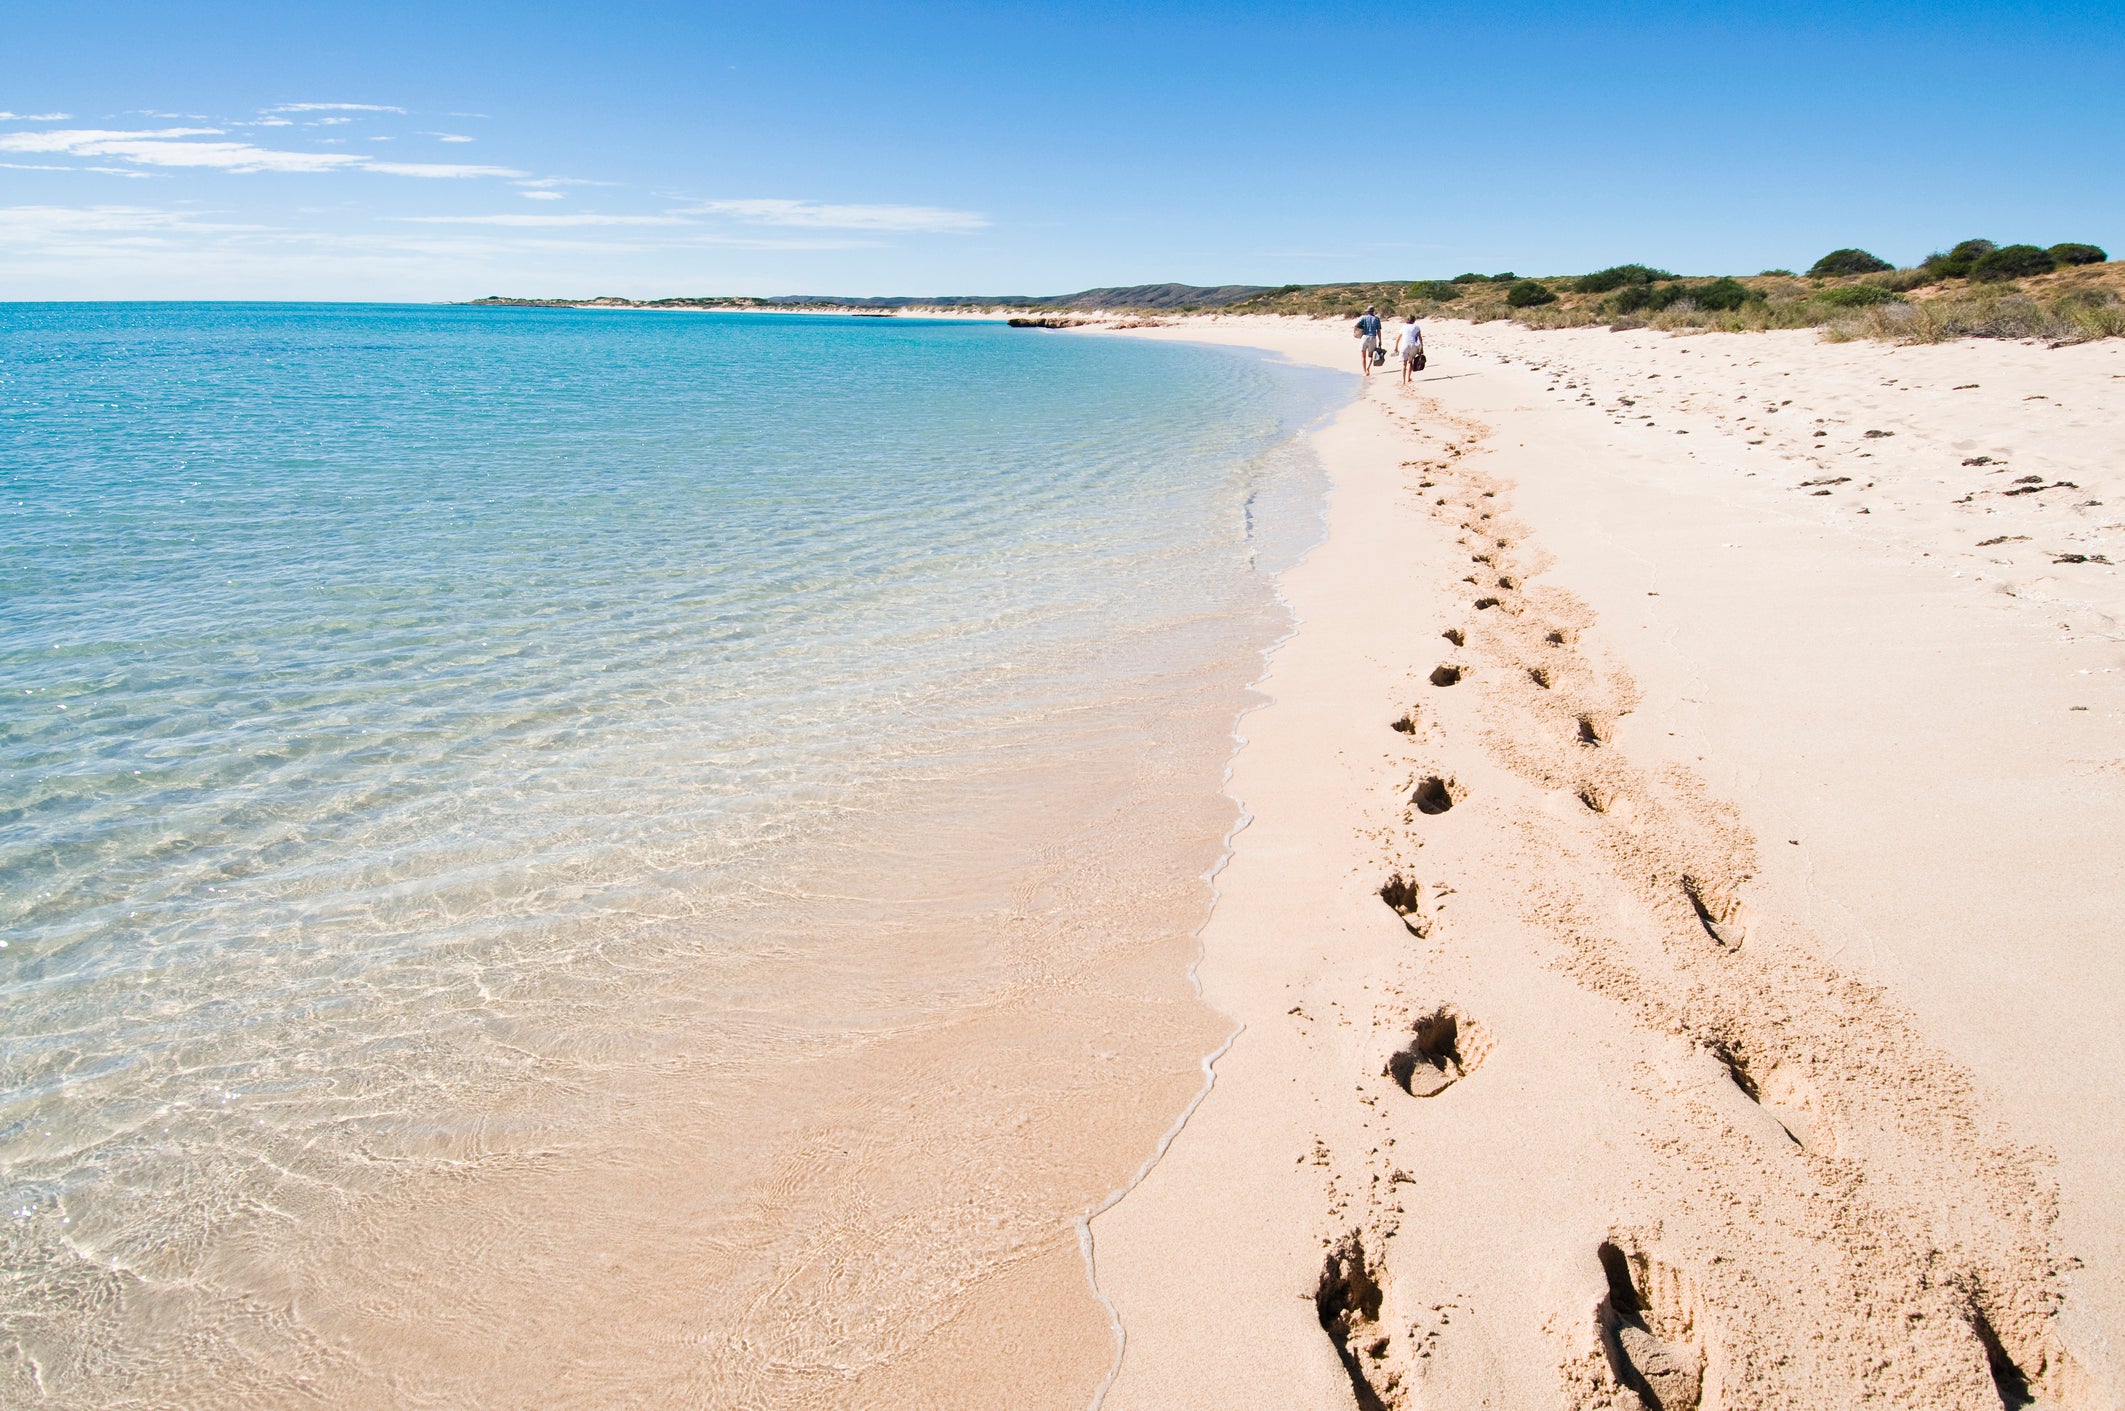 Fraser Island’s east coast is known for thrilling 4WD adventures at low-tide